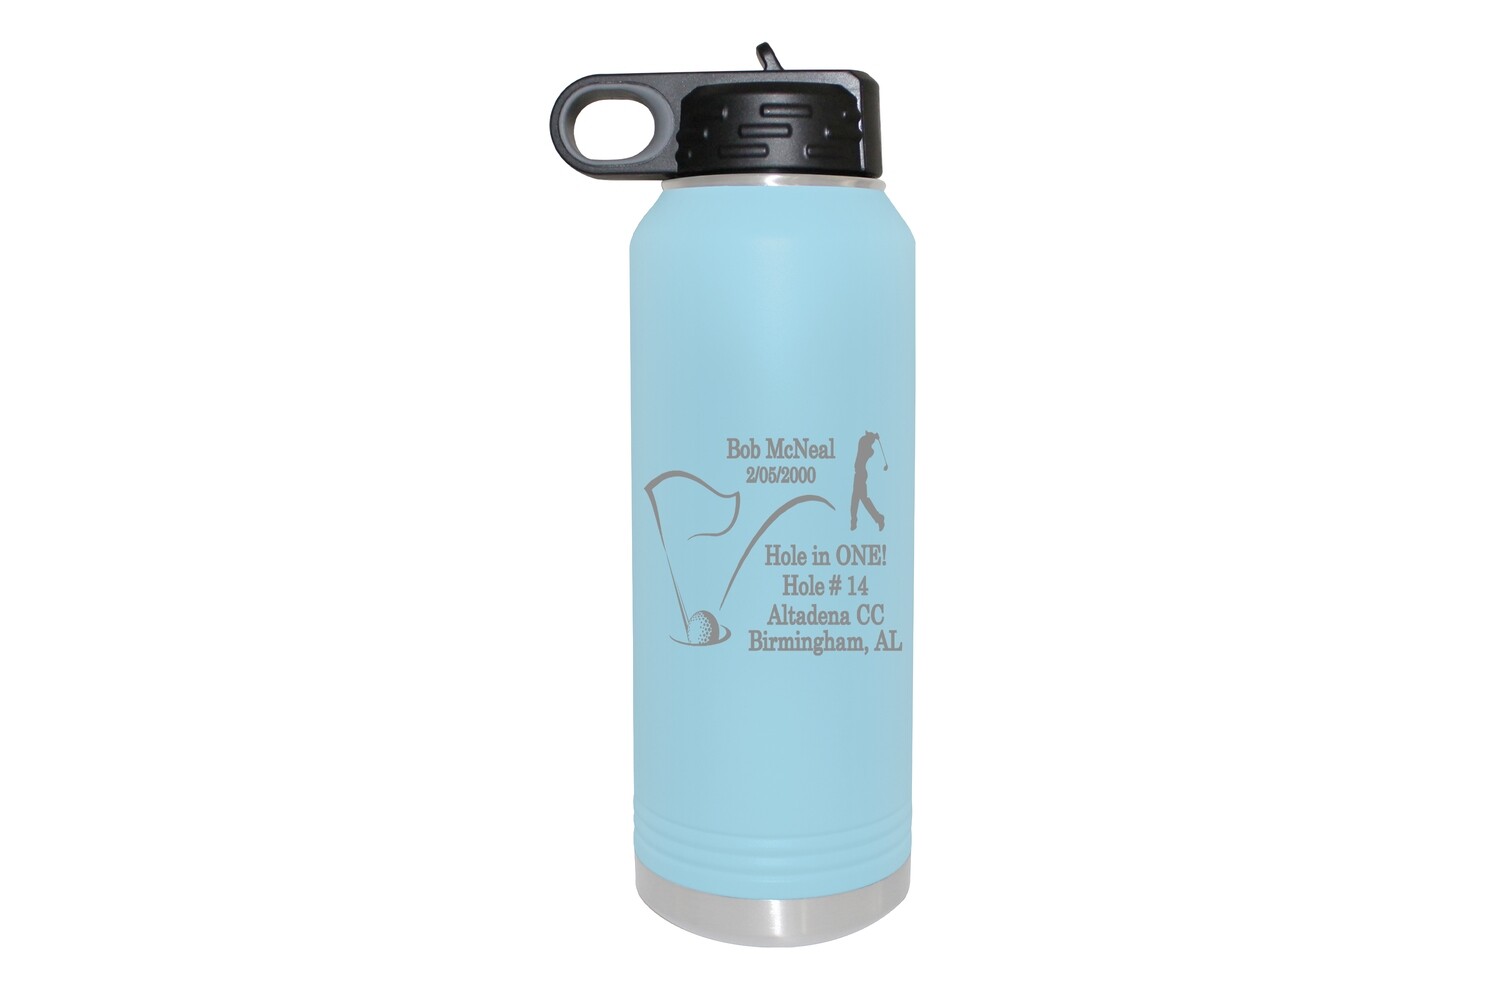 Hole In One with Personalized Information Insulated Water Bottle 32 oz